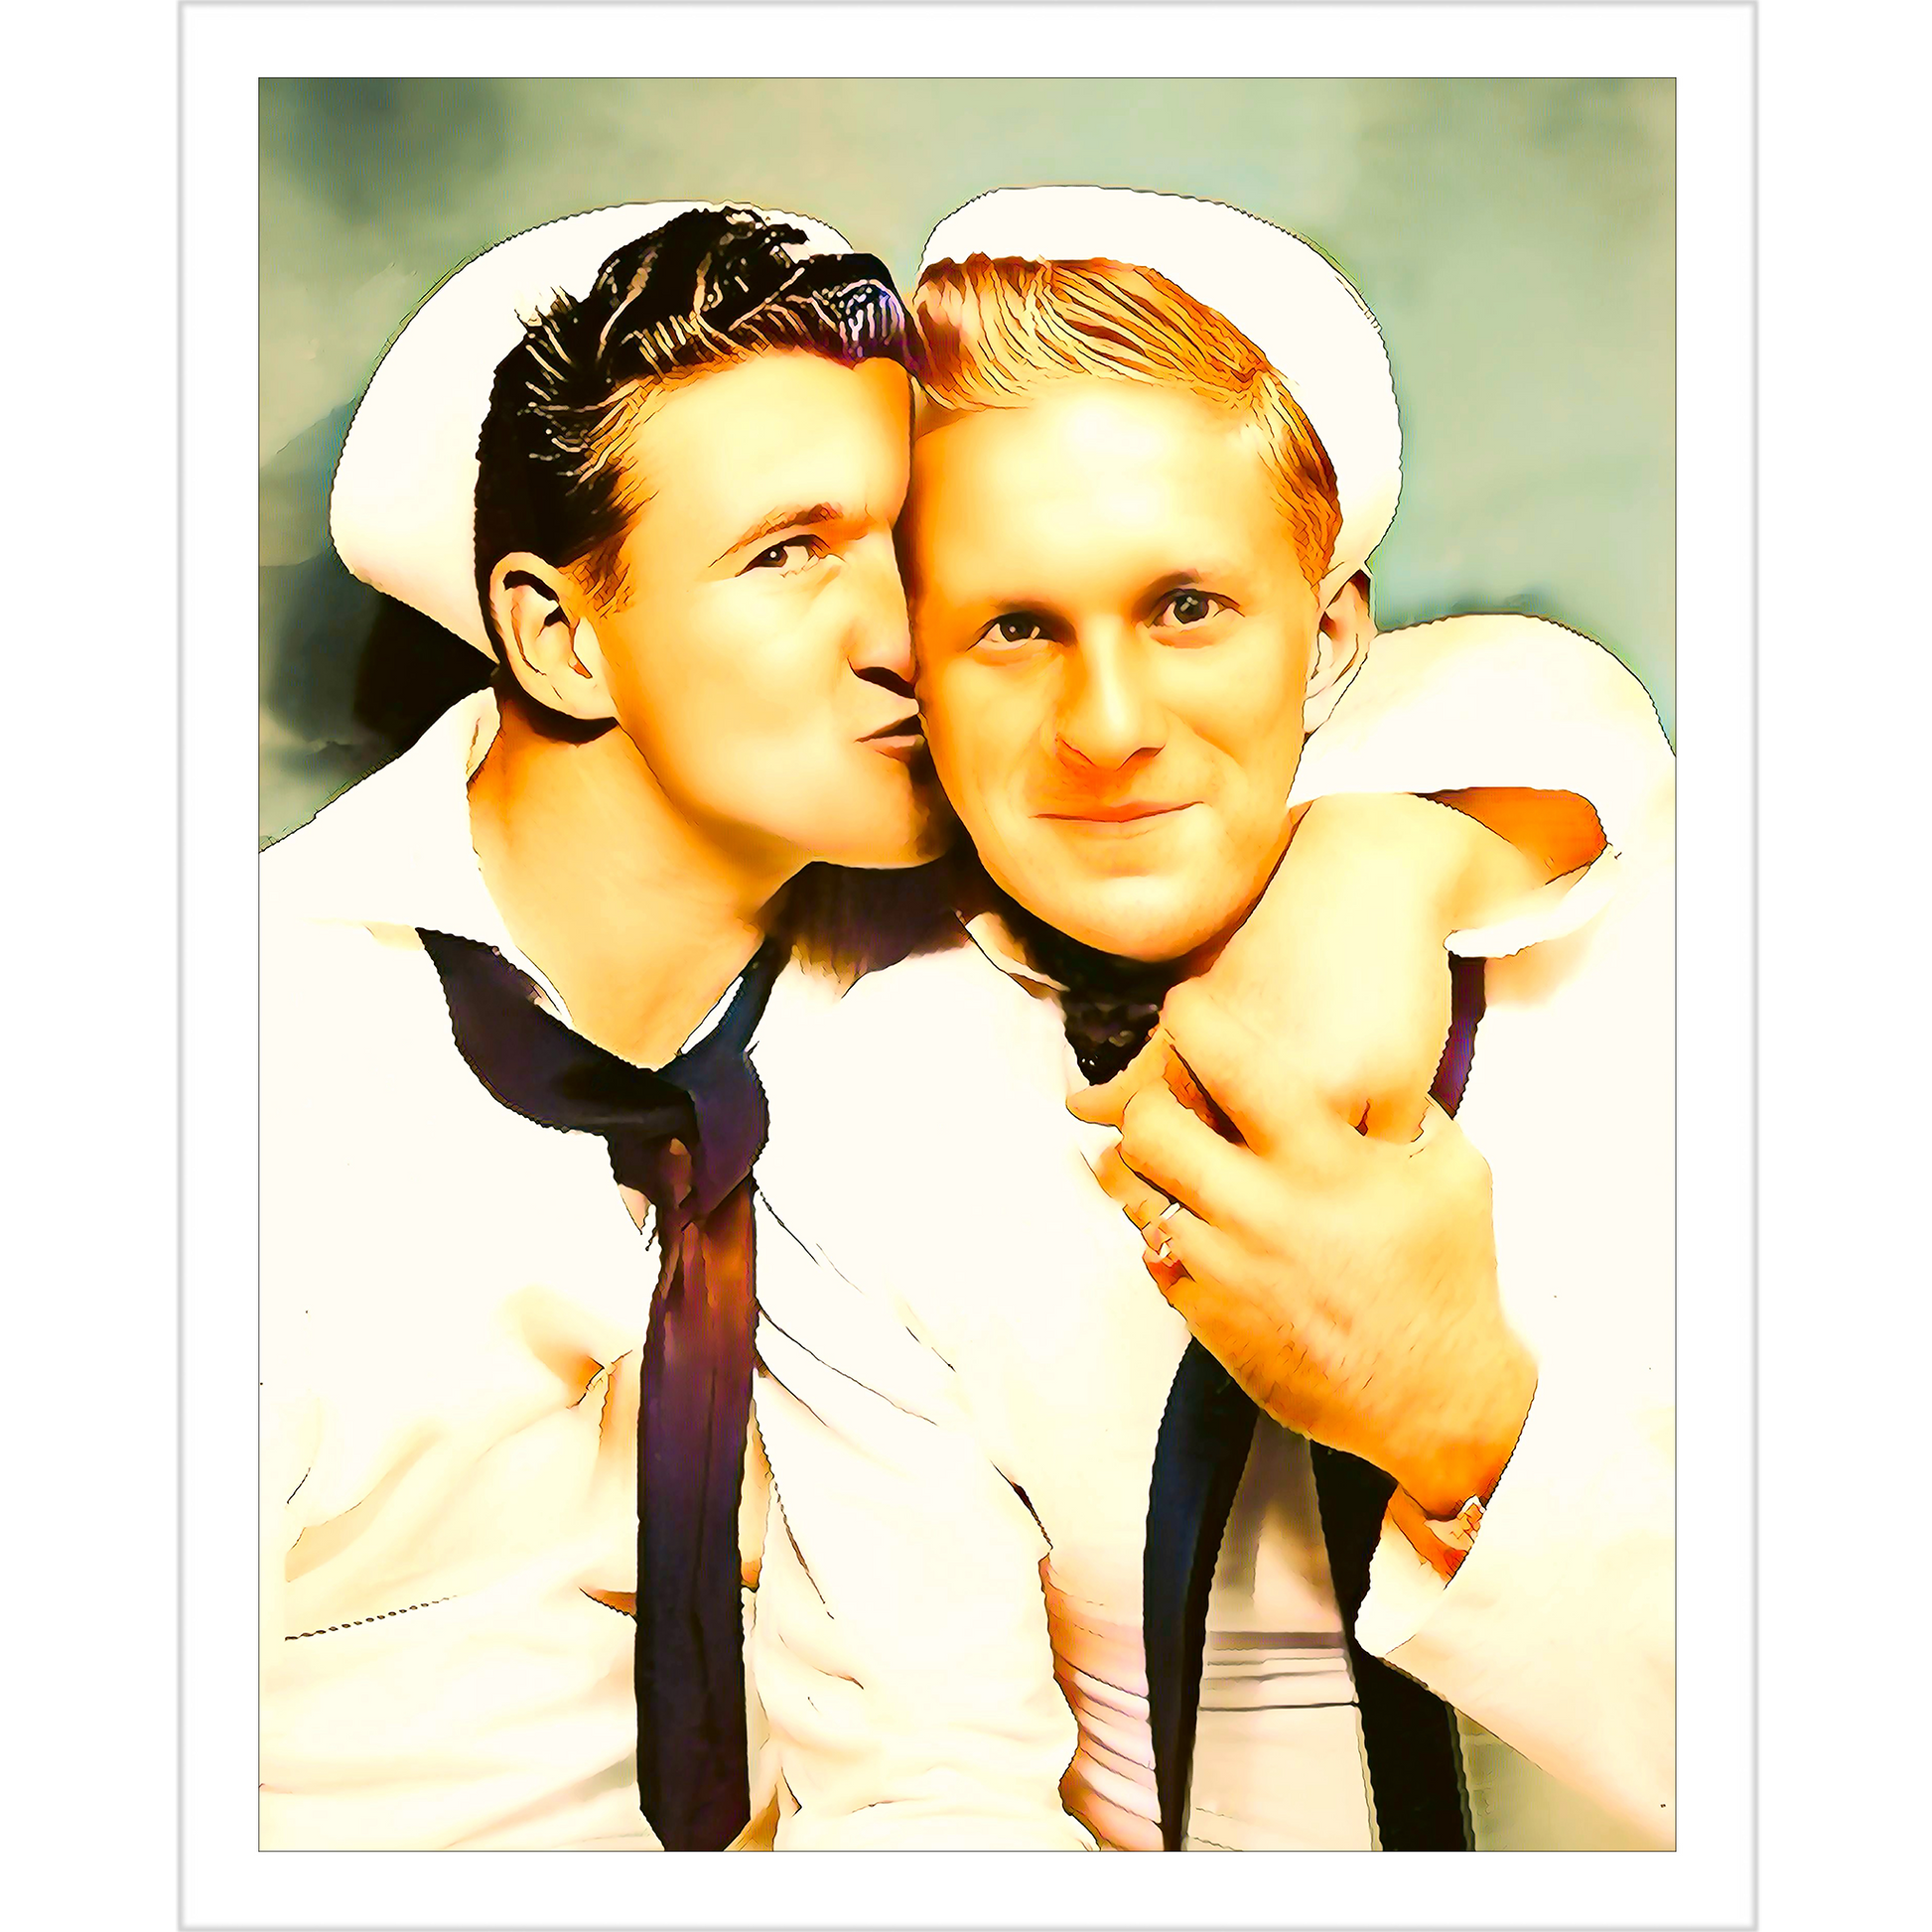 paire 051 | Giclee Artist Print Vintage Affectionate Men USN Navy Sailors Kiss Photobooth Gay Queer